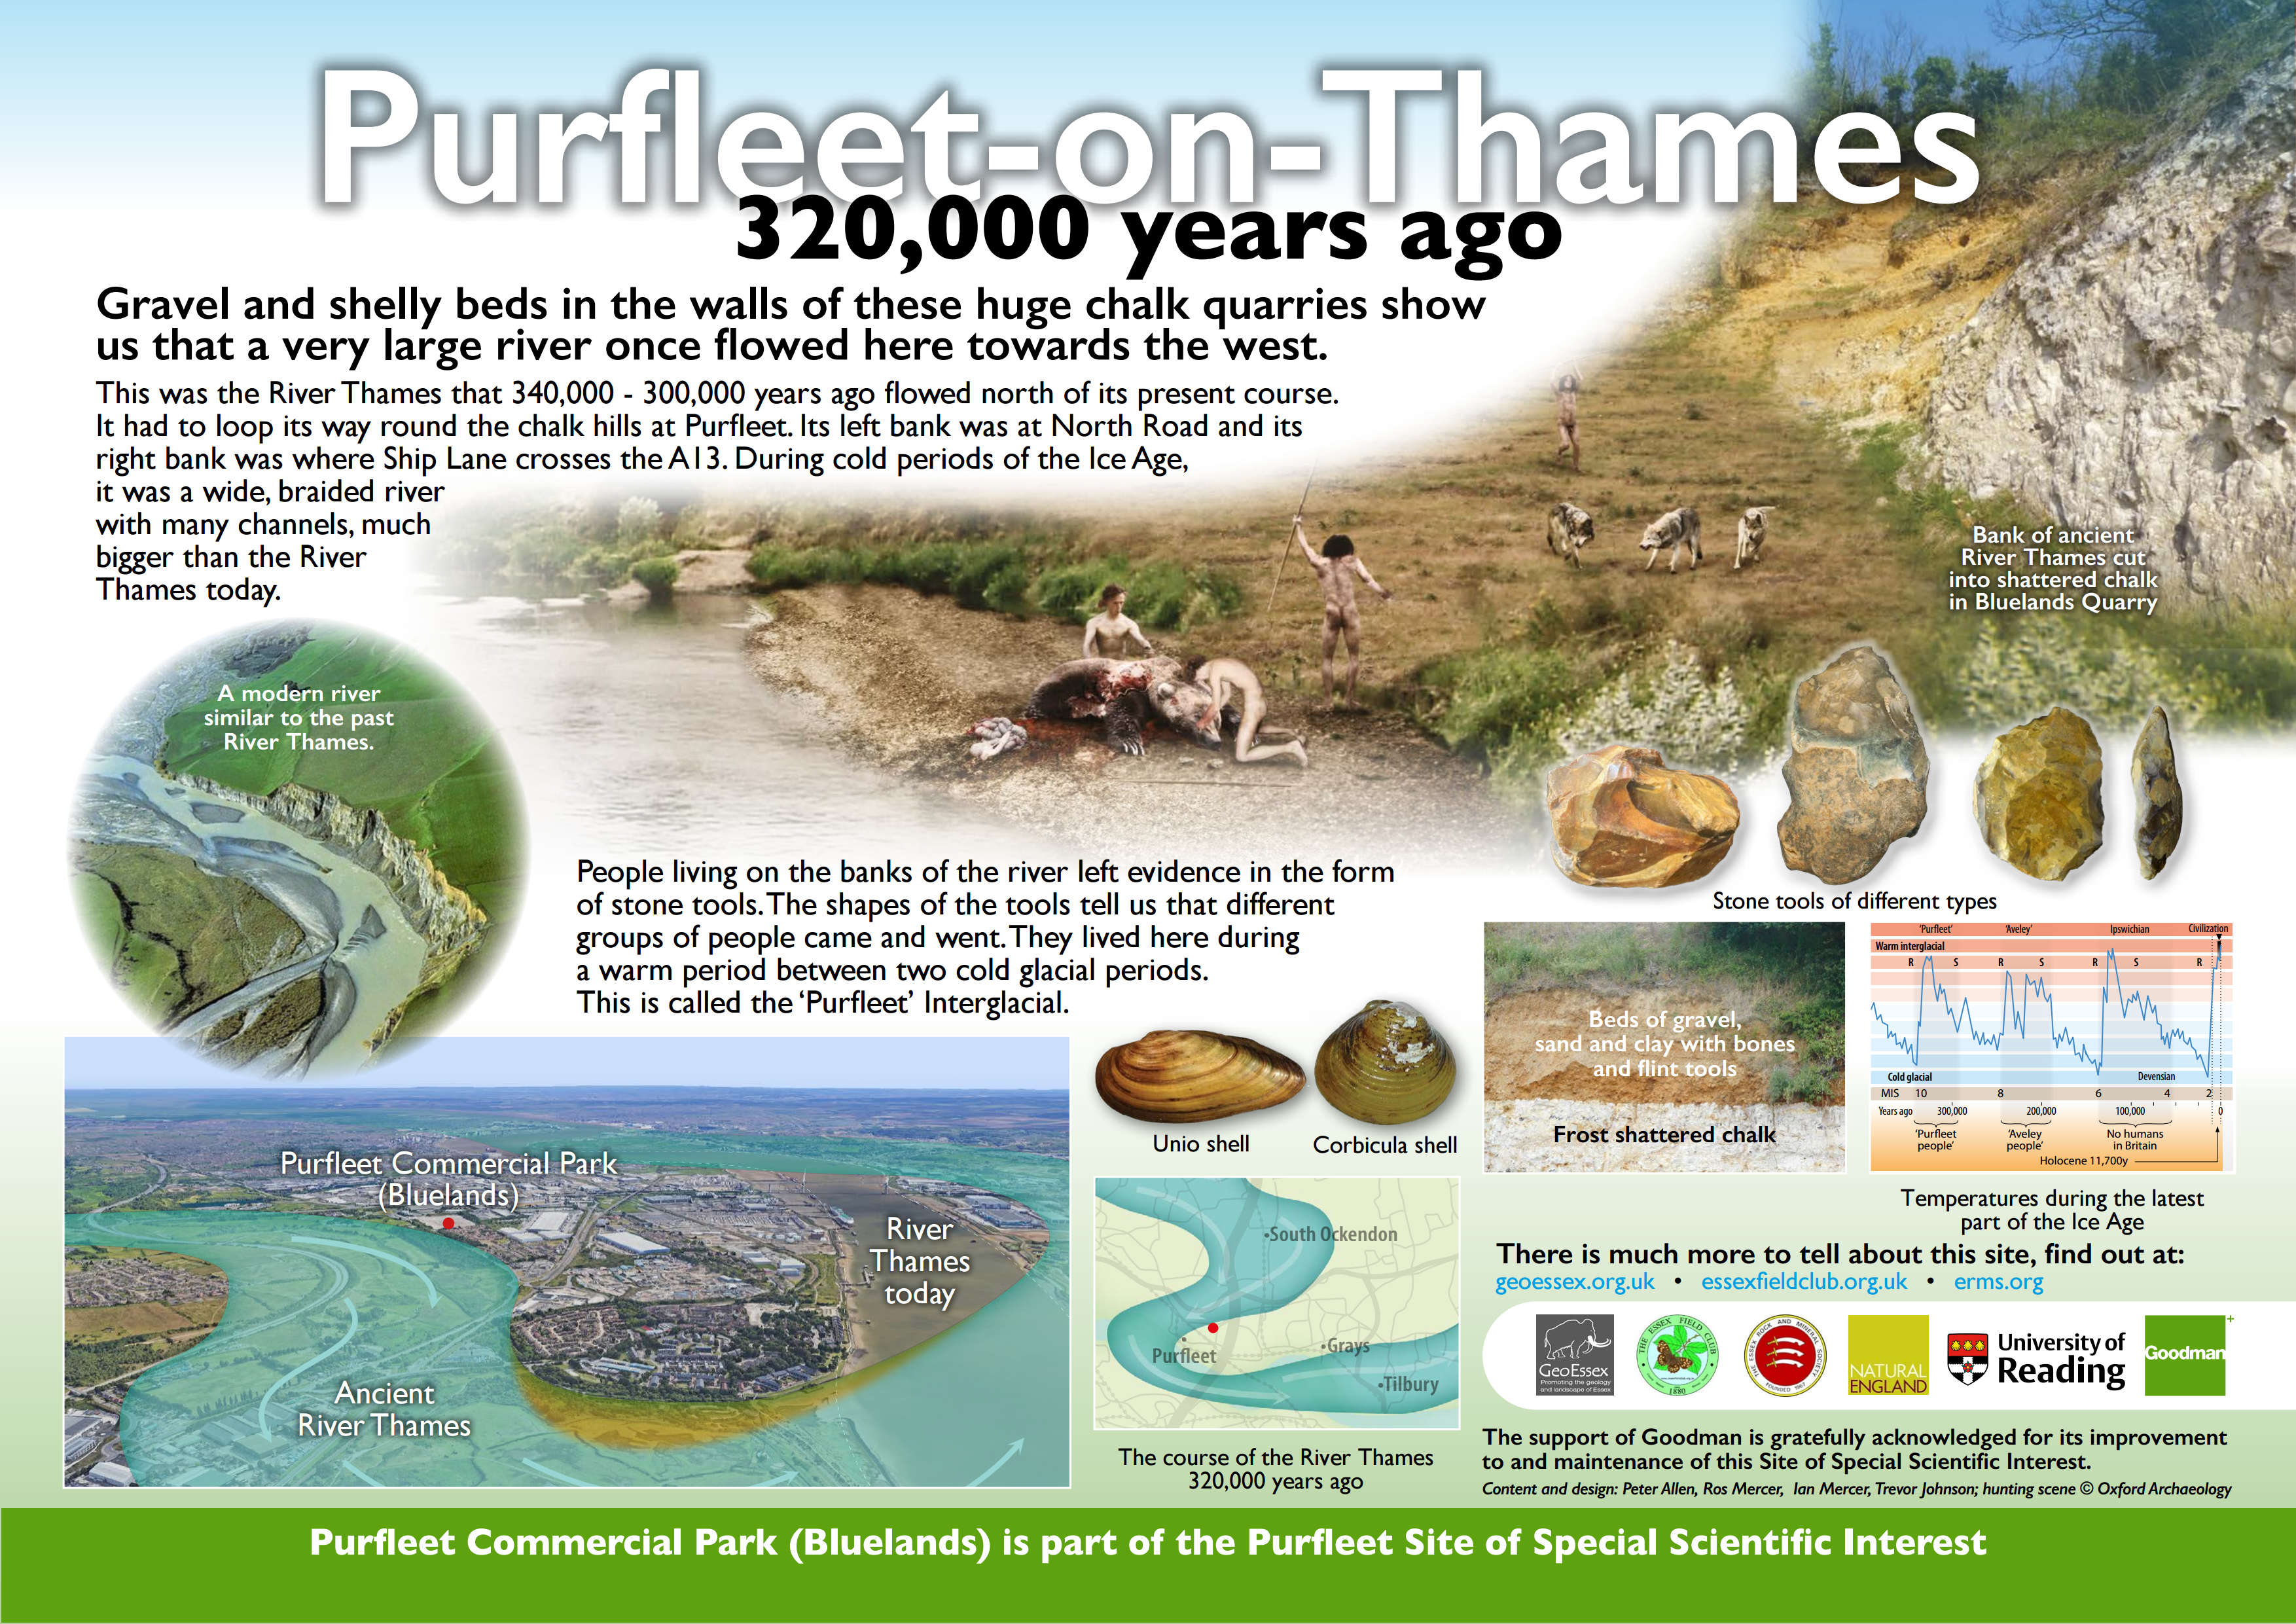 Purfleet-on-Thames. Gravel and shelly beds in the walls of these huge chalk quarries show us that a very large river once flowed here towards the west. This was the River Thames that 340,000 - 300,000 years ago flowed north of its present course. It had to loop its way round the chalk hills at  Purfleet. Its left bank was at North Road and its right bank was where Ship Lane crosses the A13. During cold periods of the Ice Age, it was a wide, braided river with many channels, much bigger than the River Thames today. A modern river similar to the past River Thames. Bank of ancient River Thames cut into shattered chalk in Bluelands Quarry. People living on the banks of the river left evidence in the form of stone tools. The shapes of the tools tell us that different groups of people came and went. They lived here during a warm period between two cold glacial periods. This is called the ‘Purfleet’ Interglacial. Unio shell Corbicula shell. Beds of gravel, sand and clay with bones and flint tools. Temperatures during the latest part of the Ice Age. Purfleet Commercial Park (Bluelands). Ancient River Thames. River Thames today. The course of the River Thames 320,000 years ago. There is much more to tell about this site, find out at: geoessex.org.uk essexfieldclub.org.uk erms.org Purfleet Commercial Park (Bluelands) is part of the Purfleet Site of Special Scientific Interest. The support of Goodman is gratefully acknowledged for its improvement to and maintenance of this Site of Special Scientific Interest. Content and design: Peter Allen, Ros Mercer, Ian Mercer, Trevor Johnson; hunting scene © Oxford Archaeology